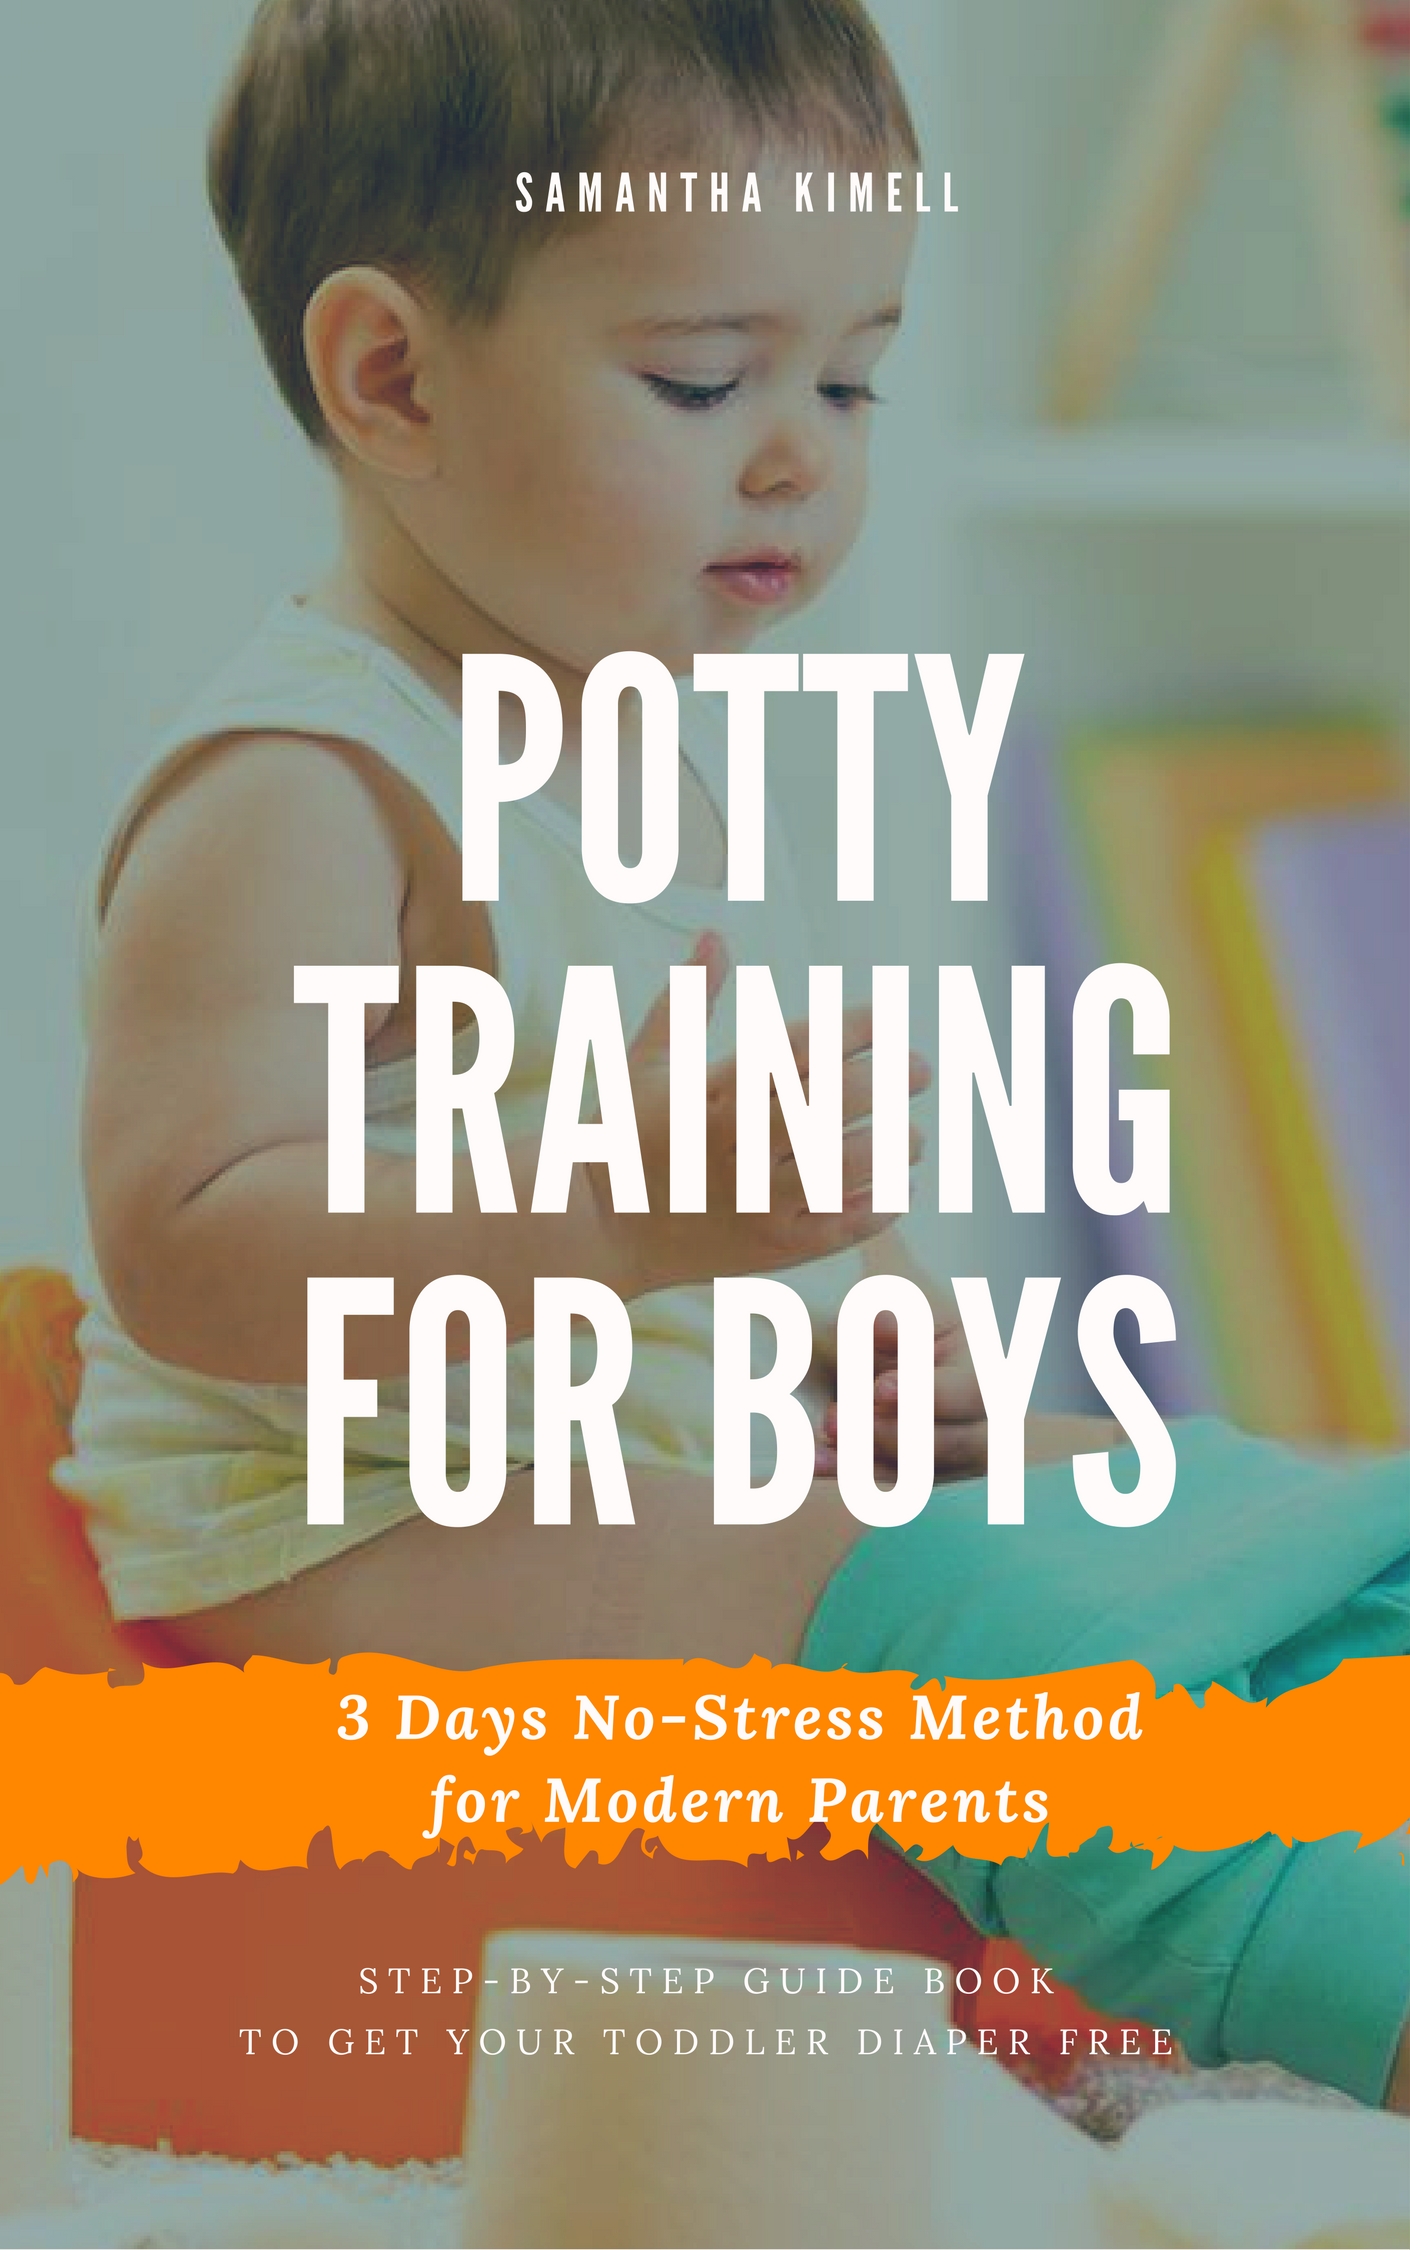 FREE: Potty Training for Boys in 3 Days: Step-by-Step Guide Book to Get Your Toddler Diaper Free, No-Stress Toilet Training. + BONUS: 41 Quick Tips and Solutions for Modern Parents by Samantha Kimell